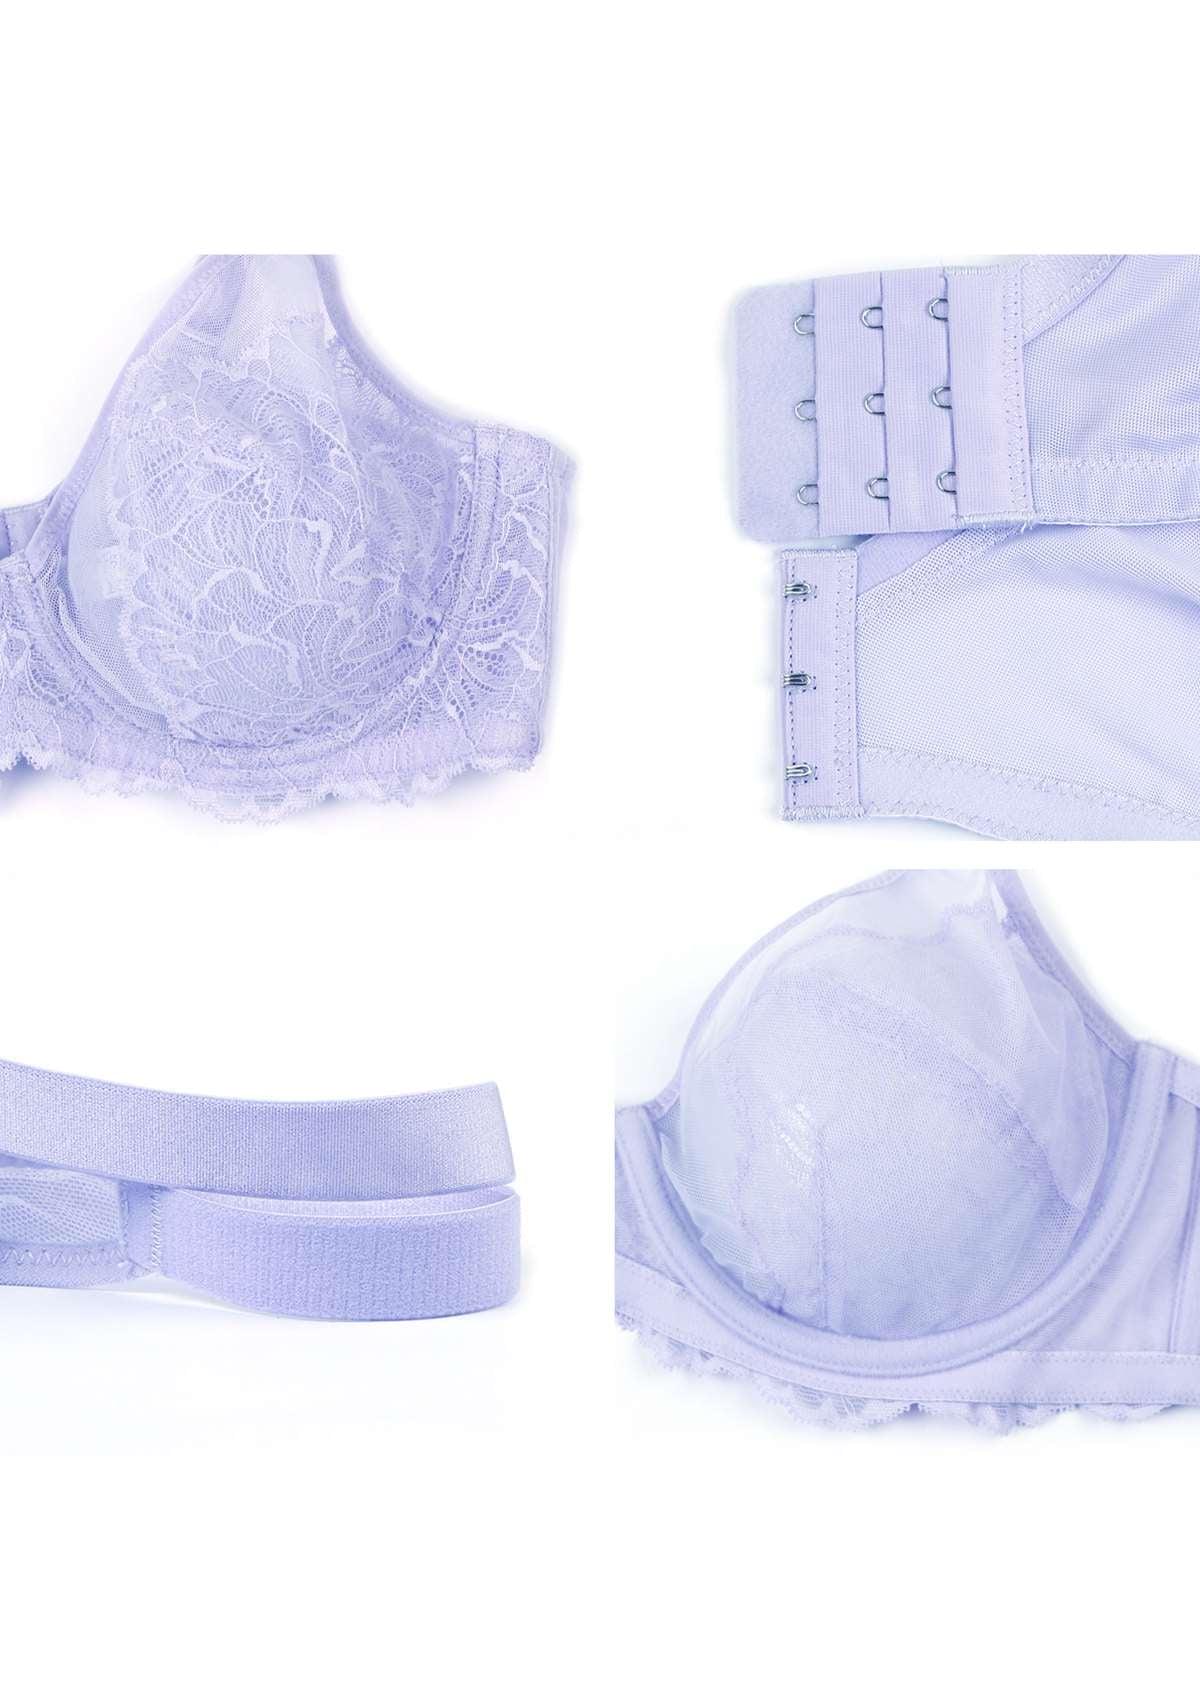 HSIA Blossom Transparent Lace Bra: Plus Size Wired Back Smoothing Bra - Light Purple / 46 / D